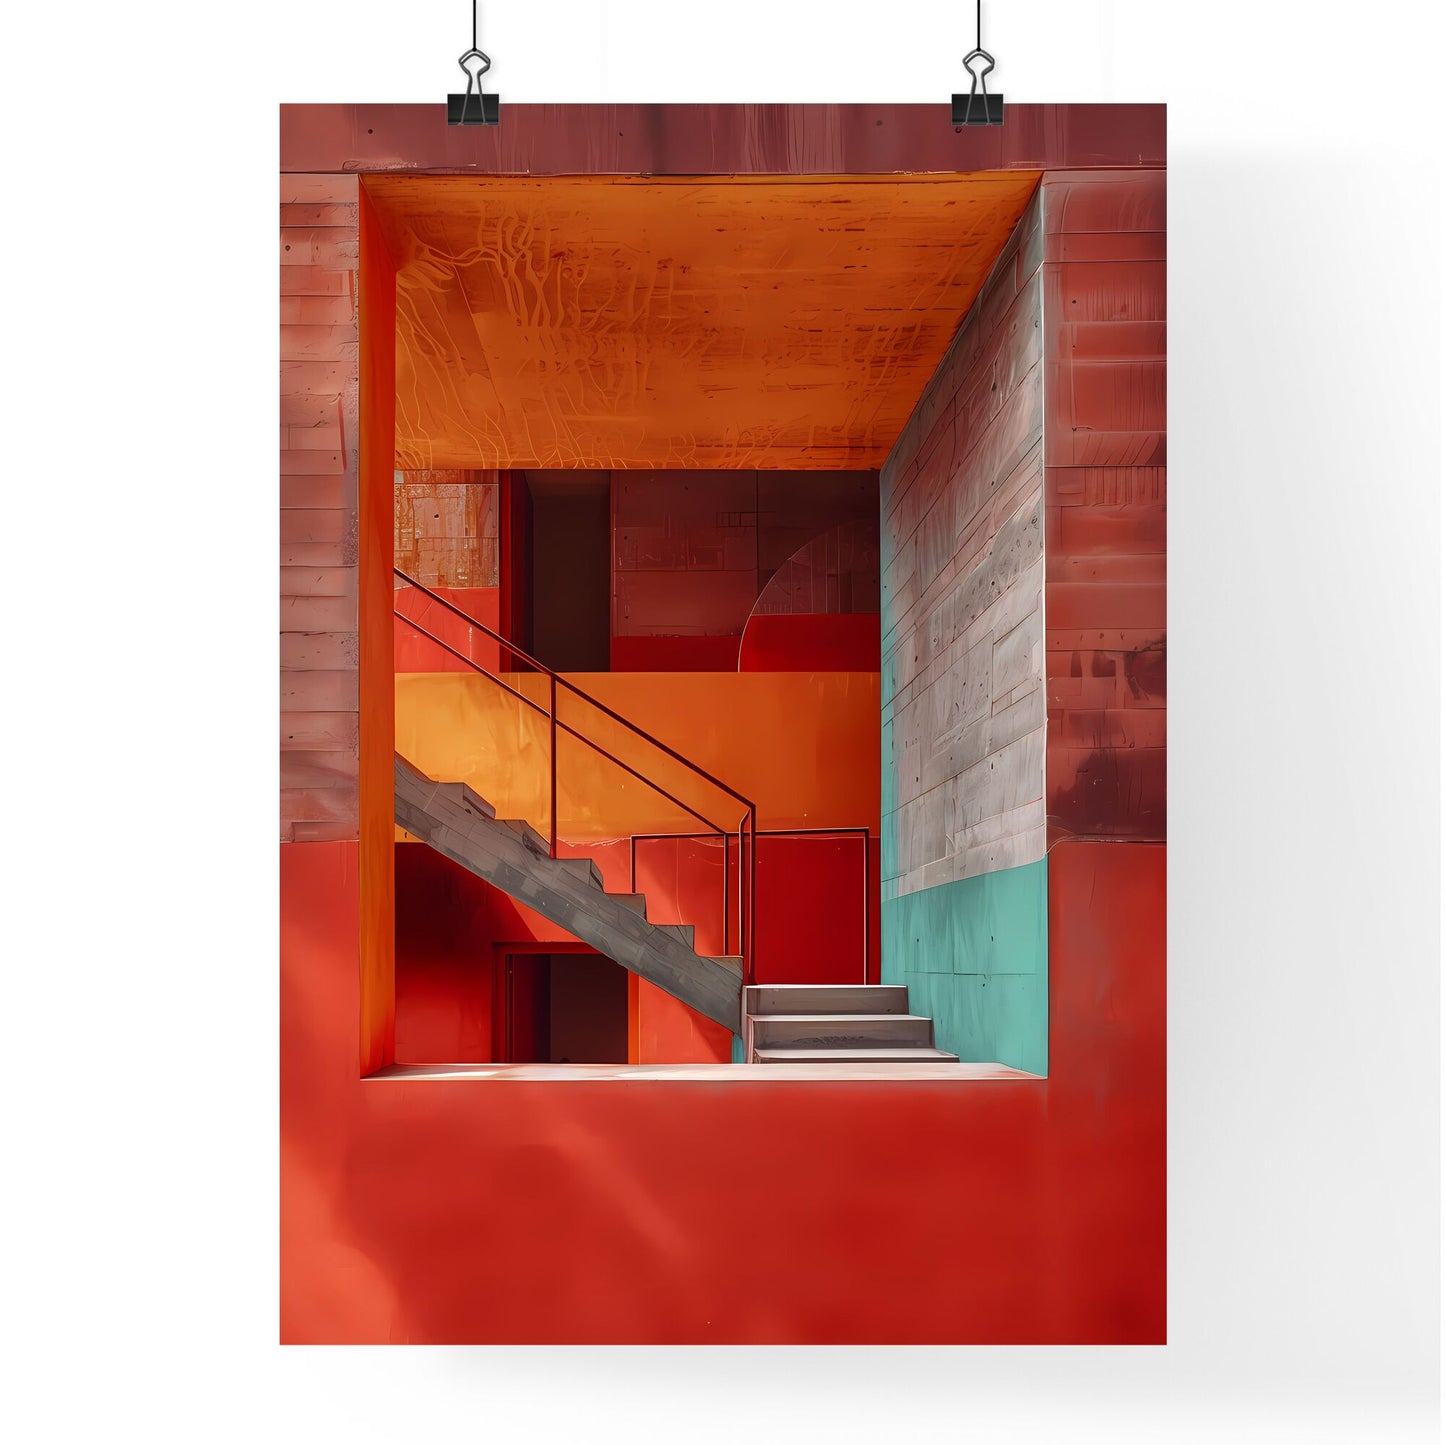 Minimalist Brutalist Architecture Staircase Leading to Vibrant Red Wall with Art Focus Default Title